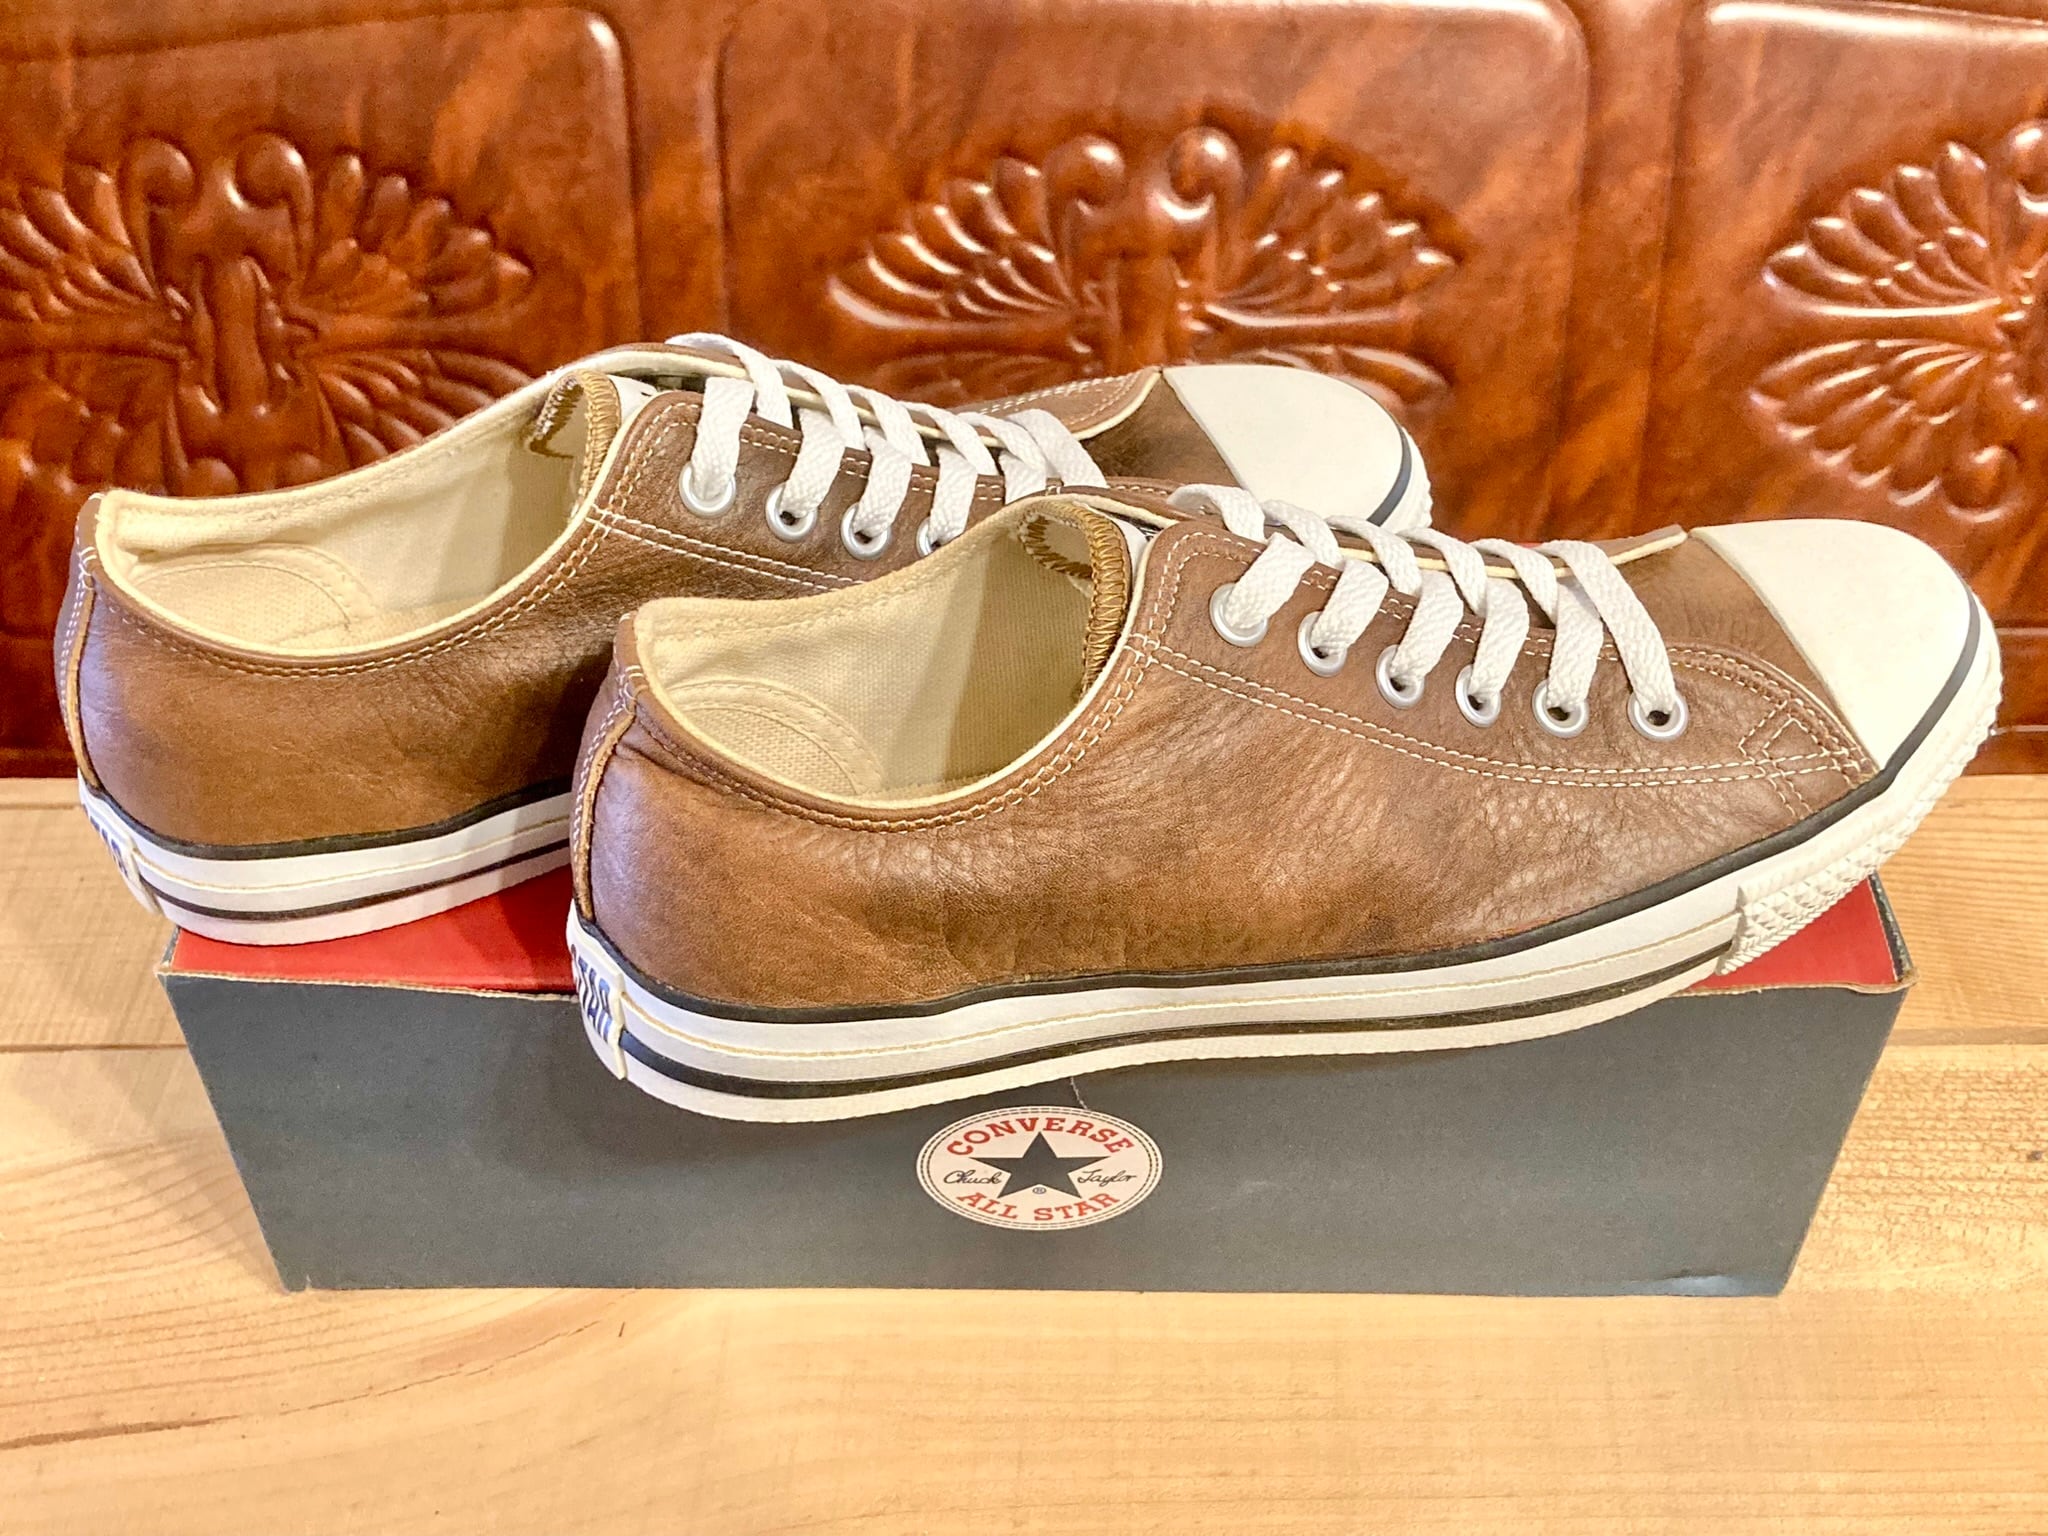 converse（コンバース） ALL STAR LEATHER（オールスター レザー）ブラウン 7.5 26cm 90s USA 239 |  freestars powered by BASE